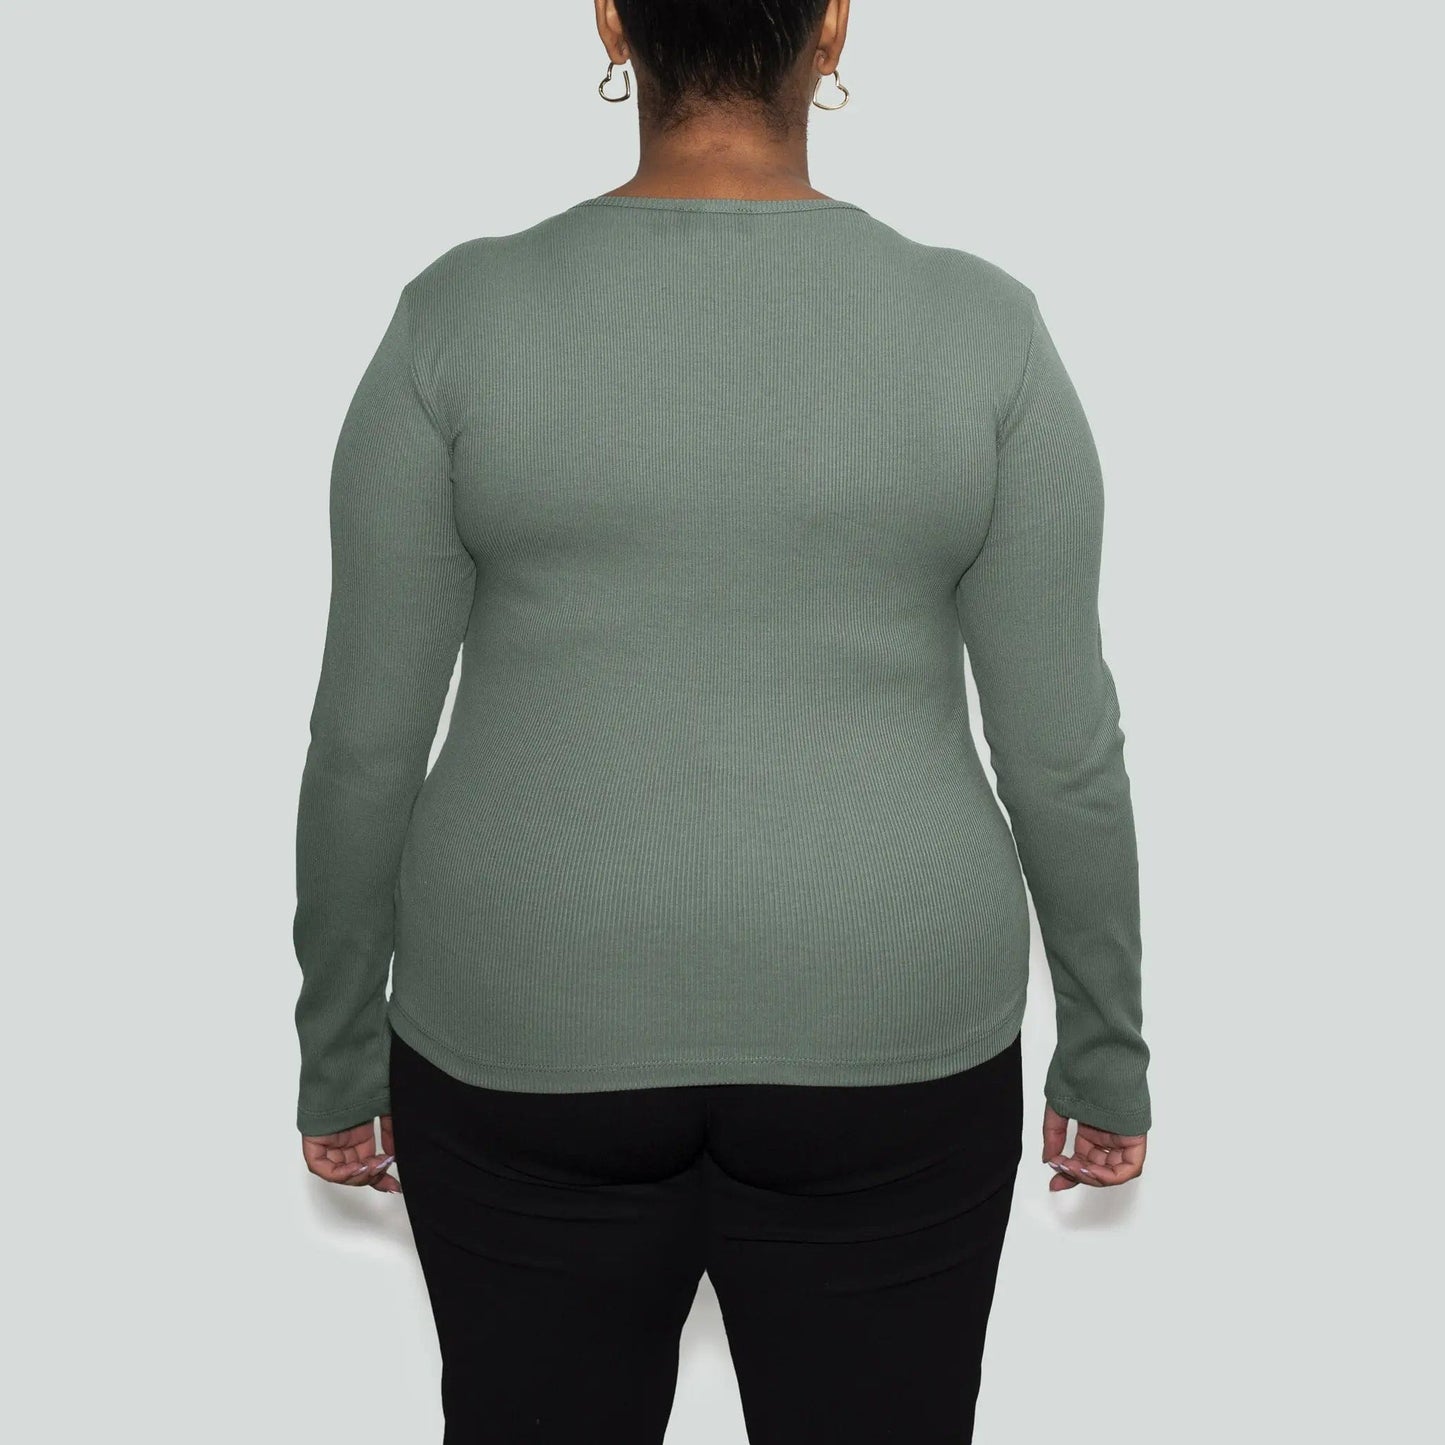 Women’s Recycled Cotton Rib Long Sleeve Top, Sage